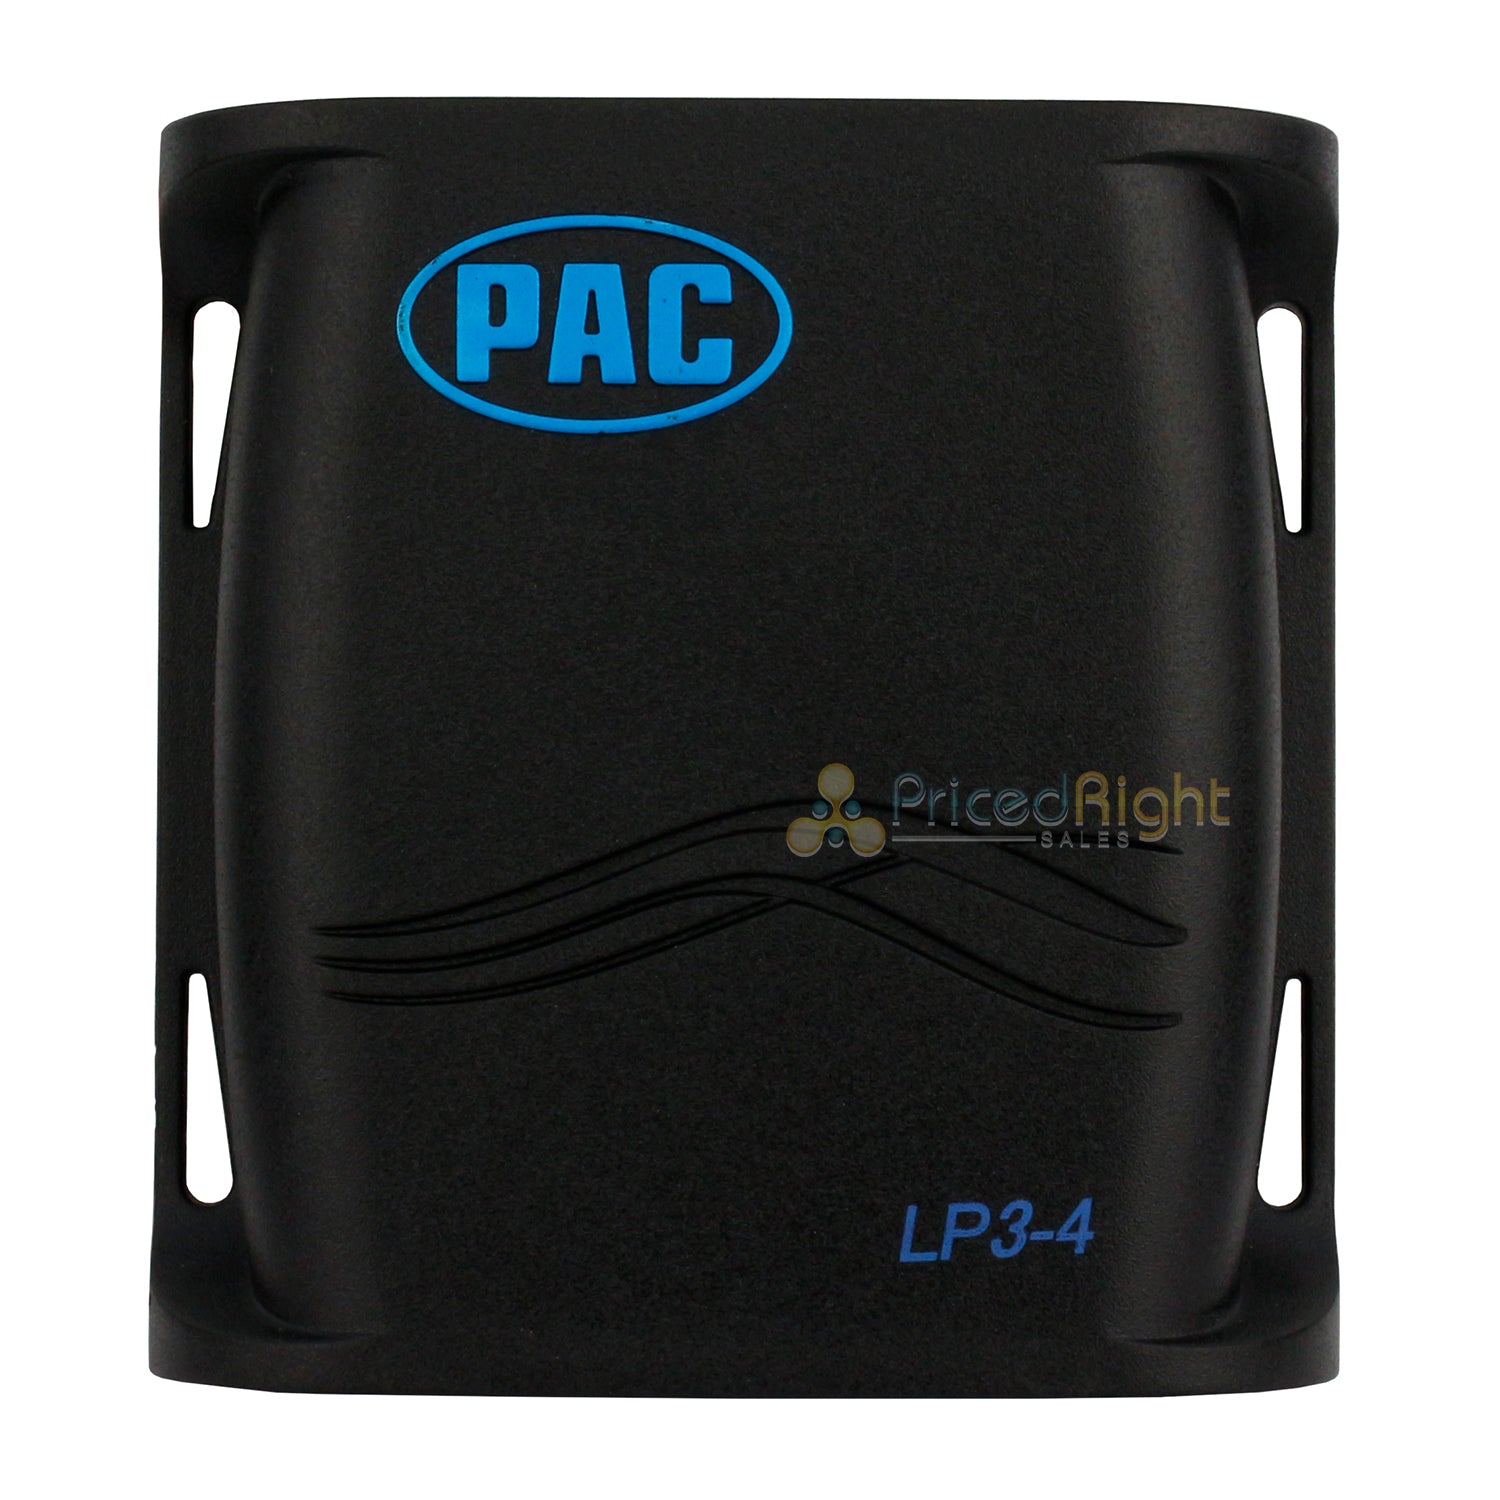 Pac LOCPRO 4 Channel Adjustable Line Converter With Removable Harness LP3-4